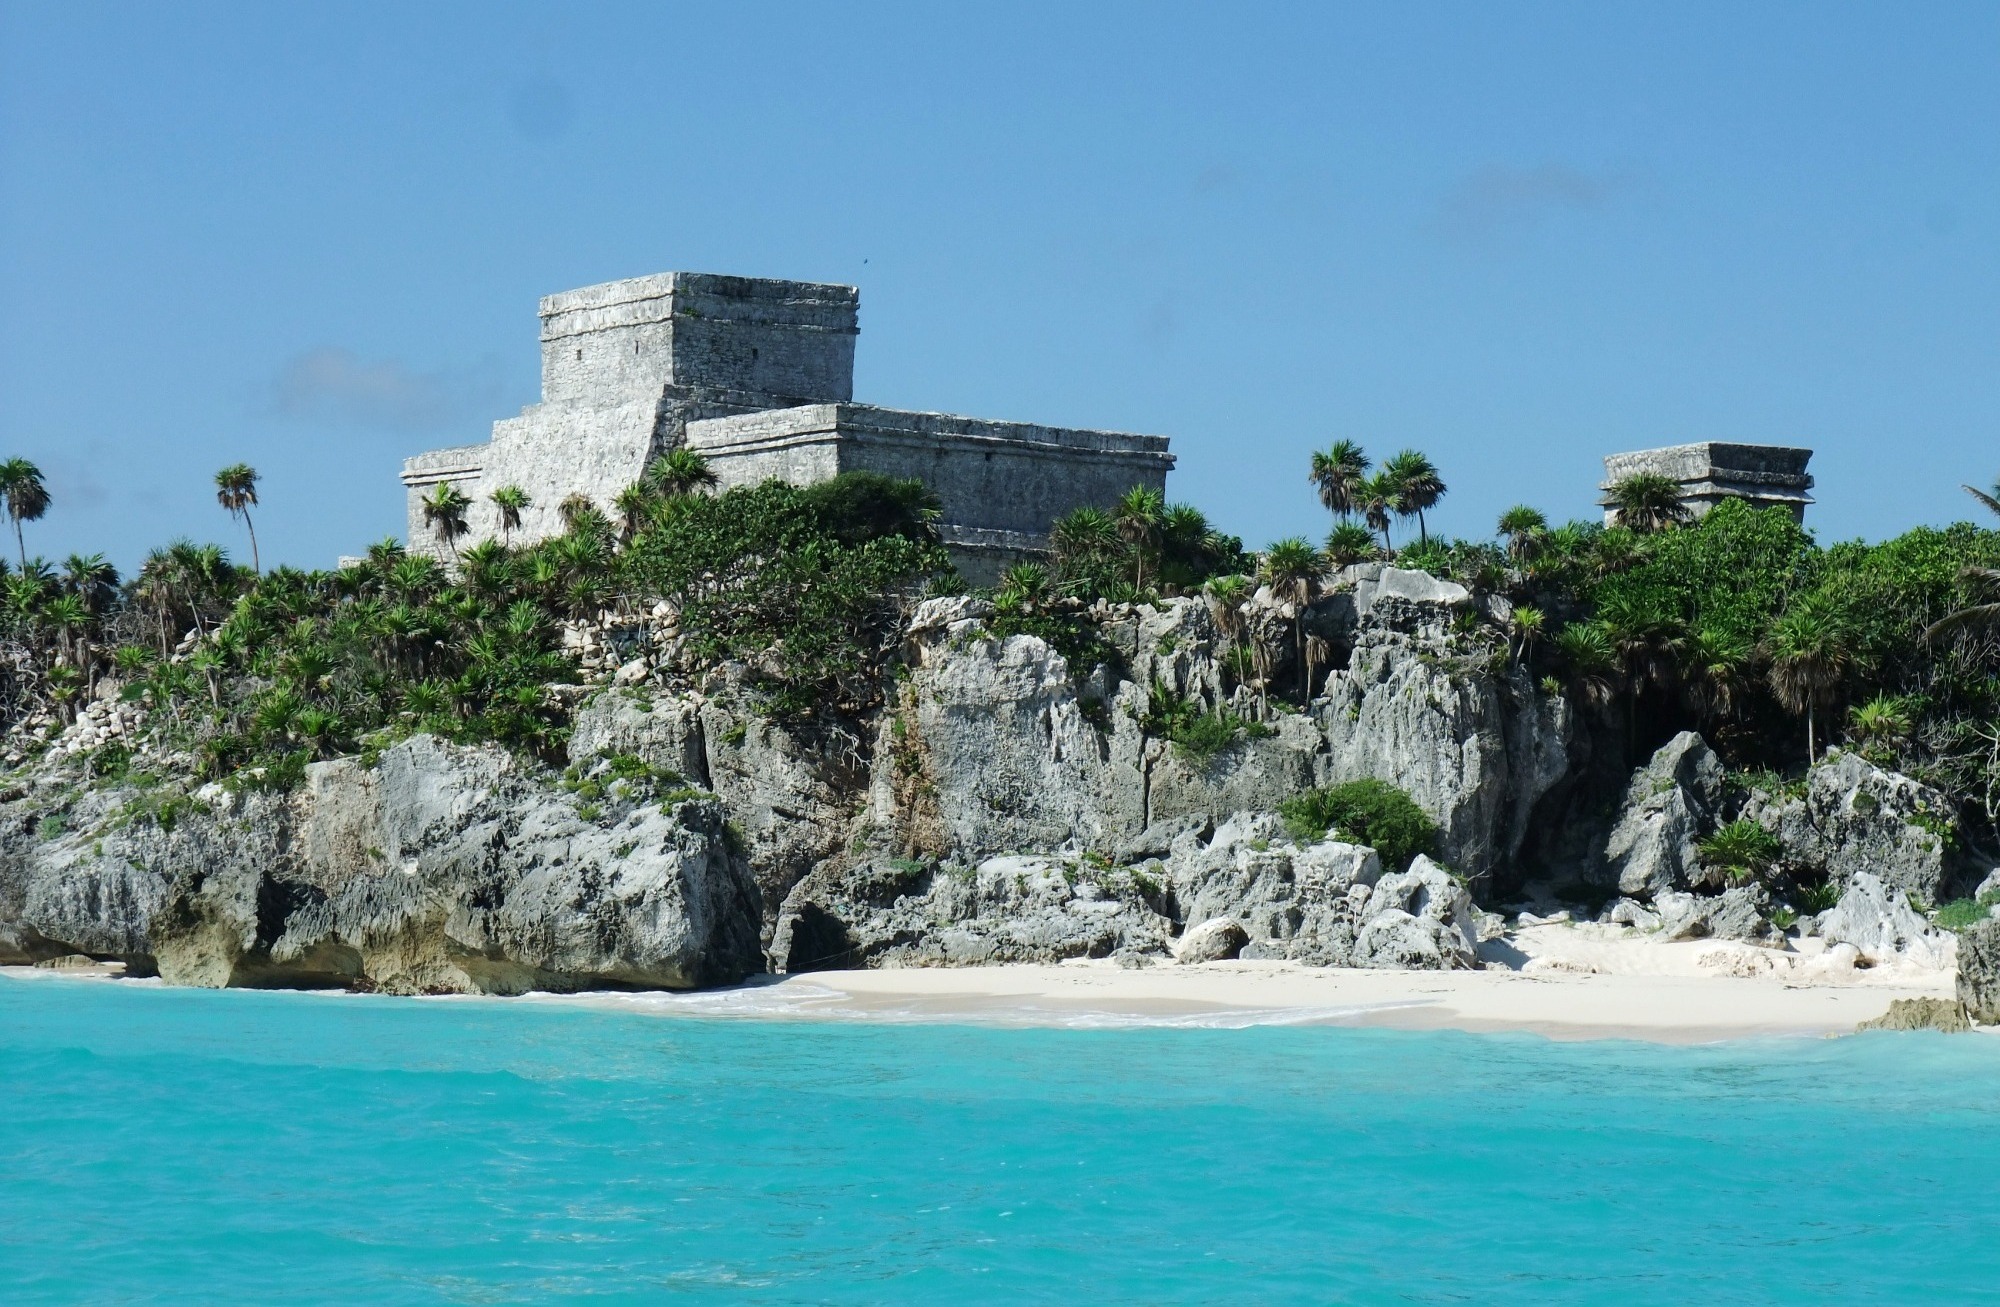 Ancient ruins of Tulum that you can explore near the Riviera Maya